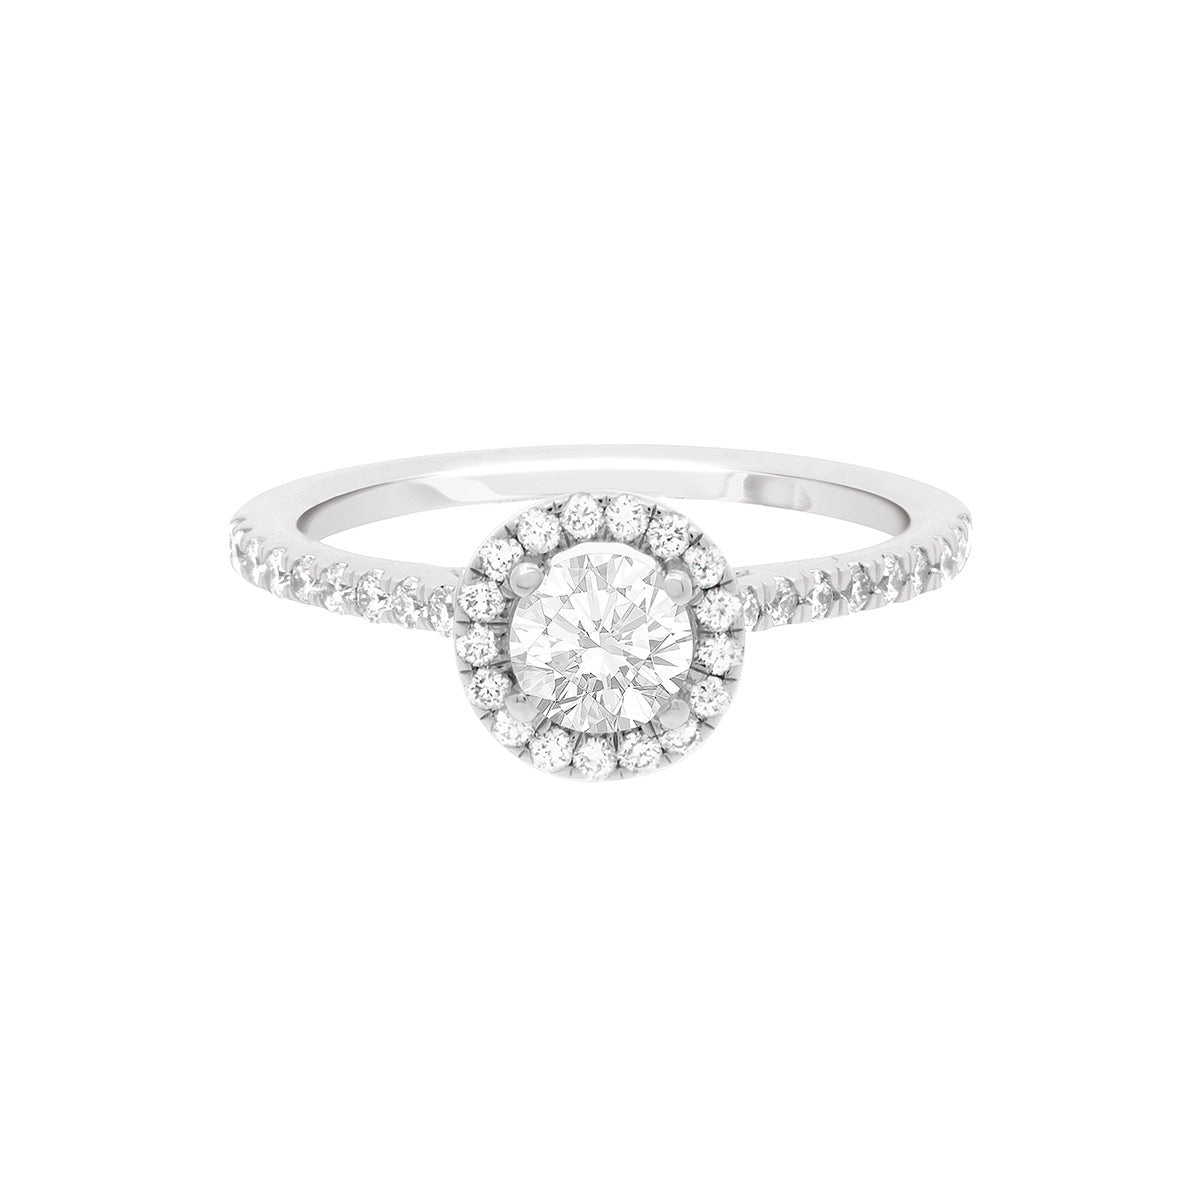 Round Halo Diamond Ring  in white gold laying flat on a white surface